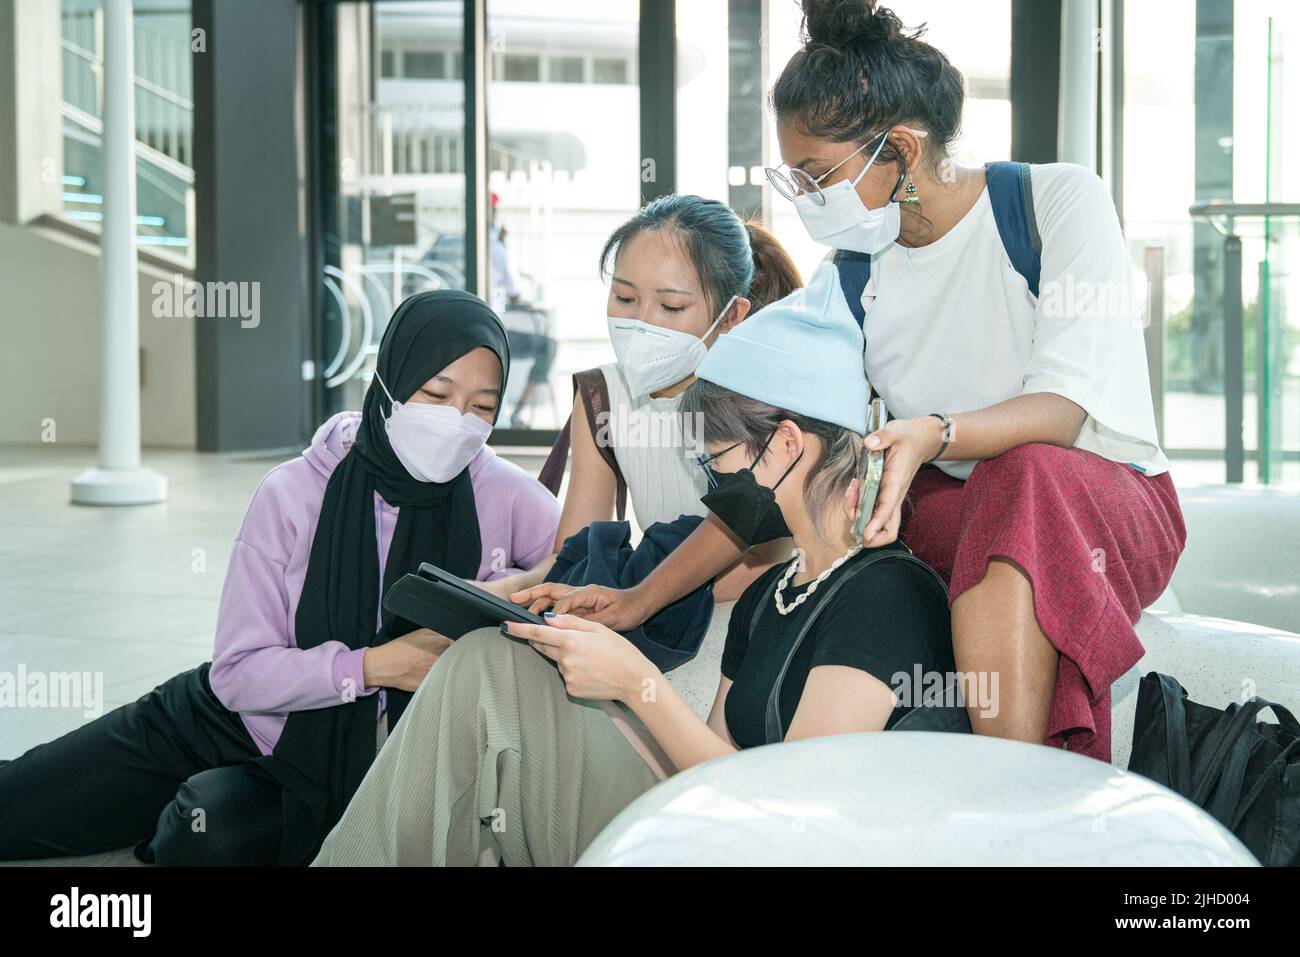 Group of young multi-ethnic Asian women with face mask on looking at a tablet together. Digital lifestyle concept. Stock Photo